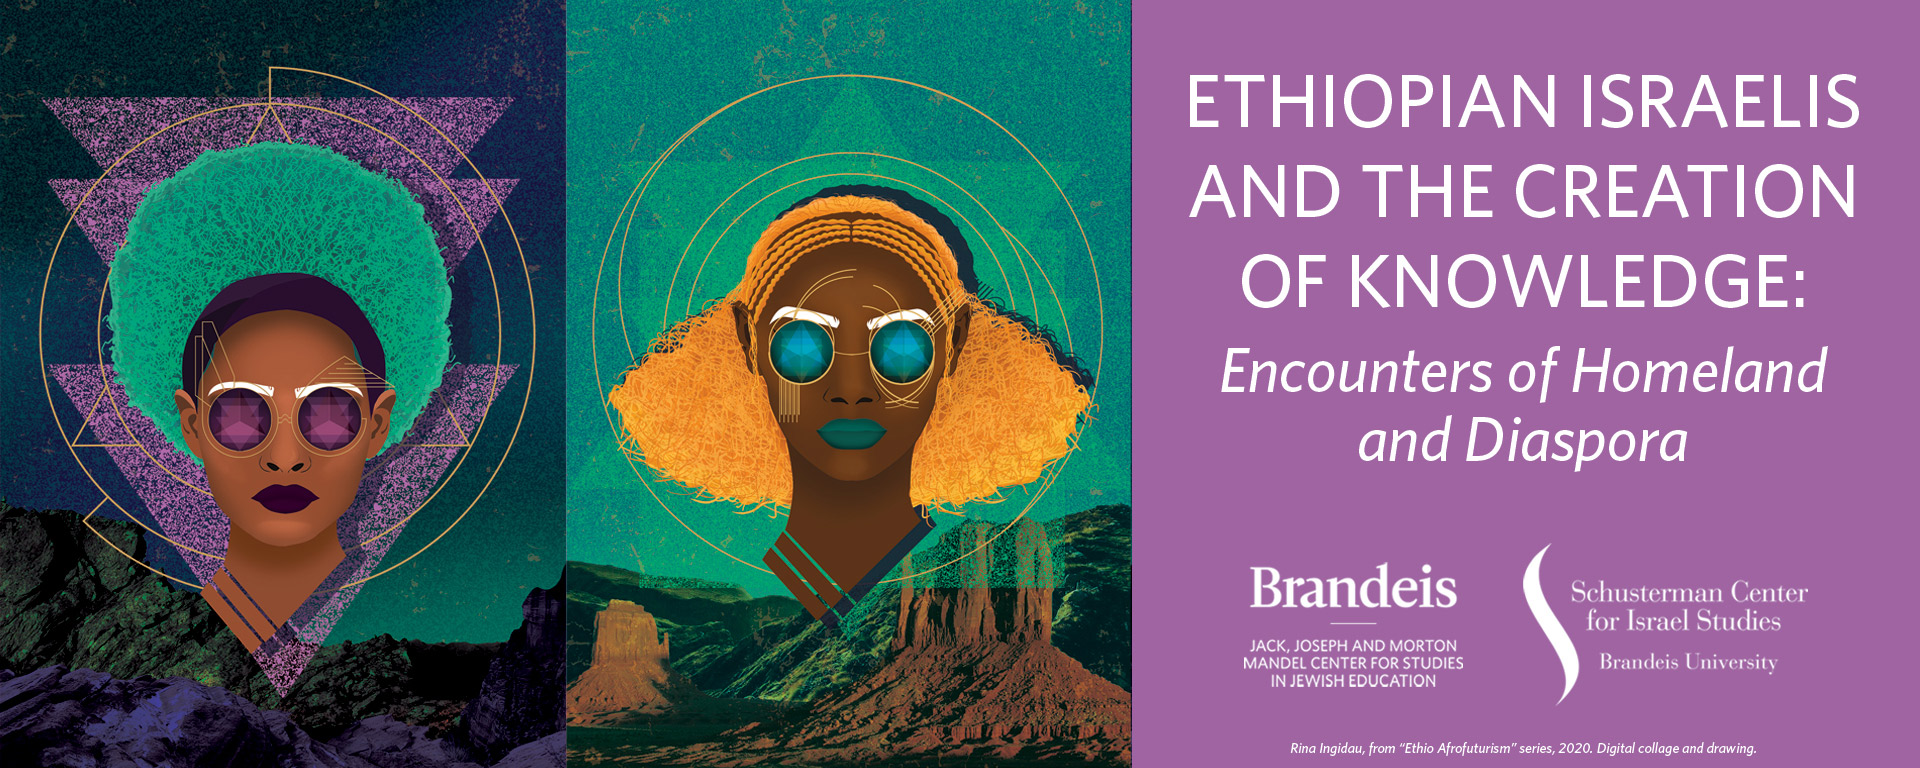 Highly stylized digital artwork showing two futuristic-looking women, in a striking color scheme of brown, purple, green and yellow. Text reads: Ethiopian Israelis and the Creation of Knowledge: Encounters of Homeland and Diaspora